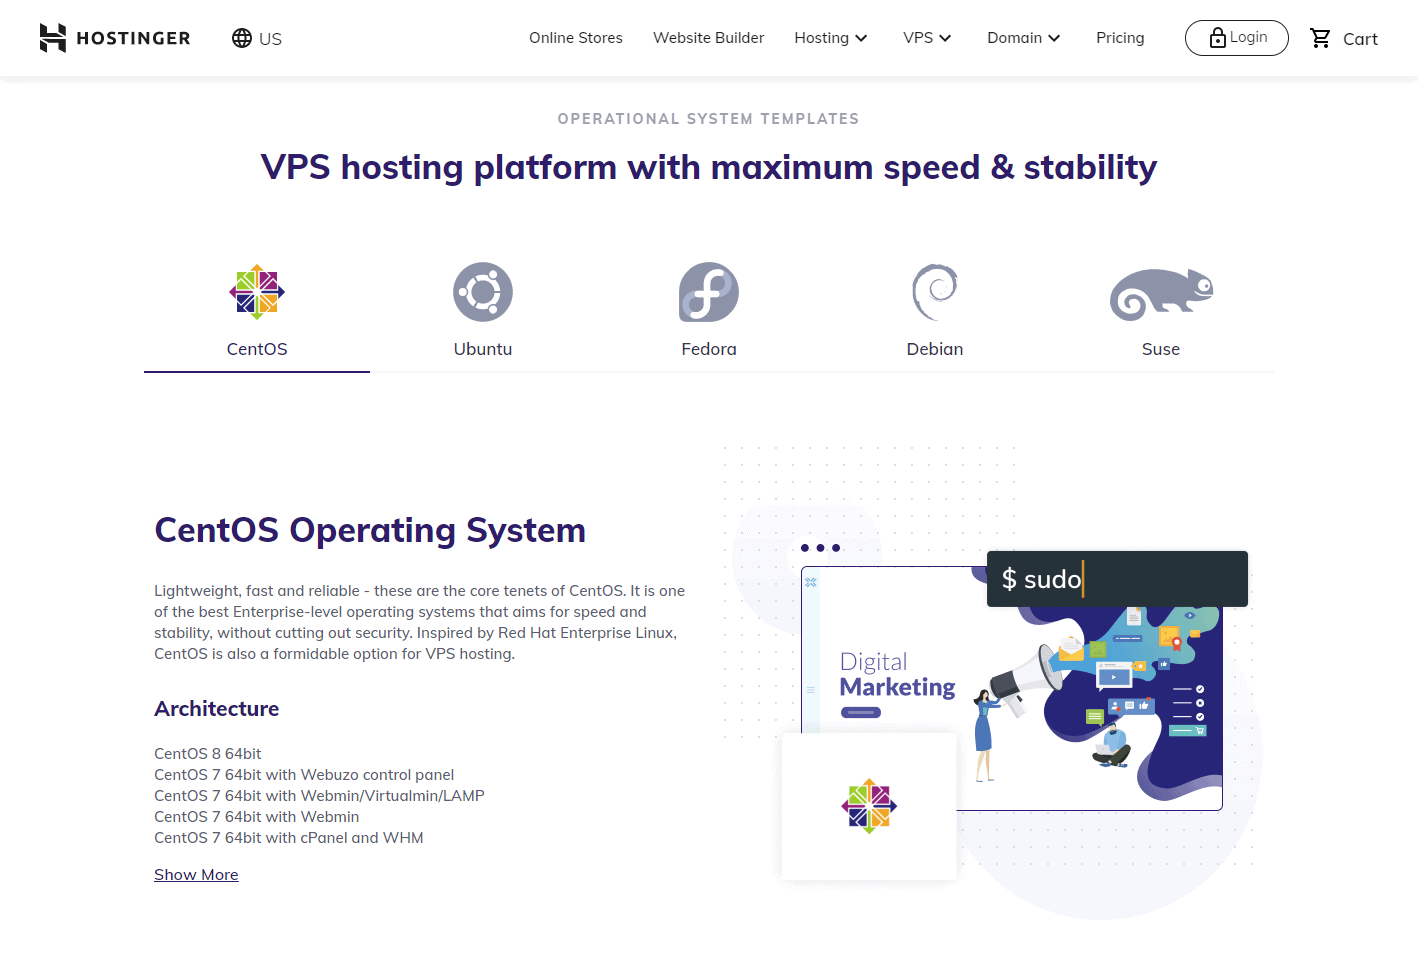 Hostinger's VPS features page